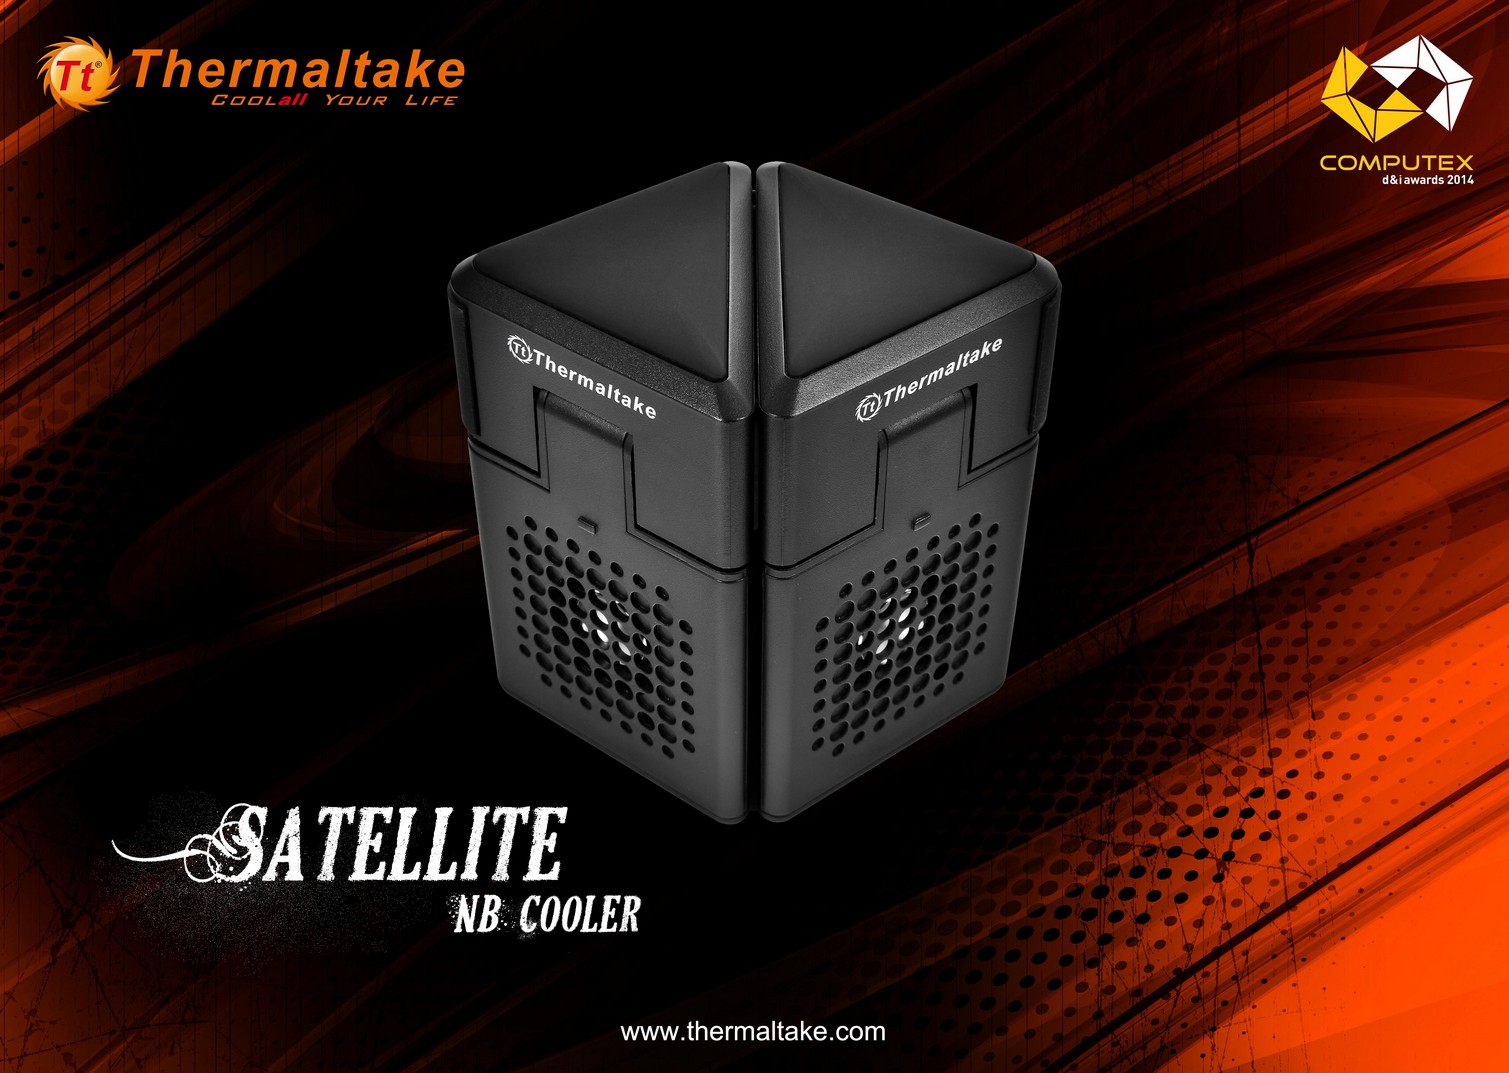 Thermaltake Announces Satellite Notebook Cooler and Speaker in One